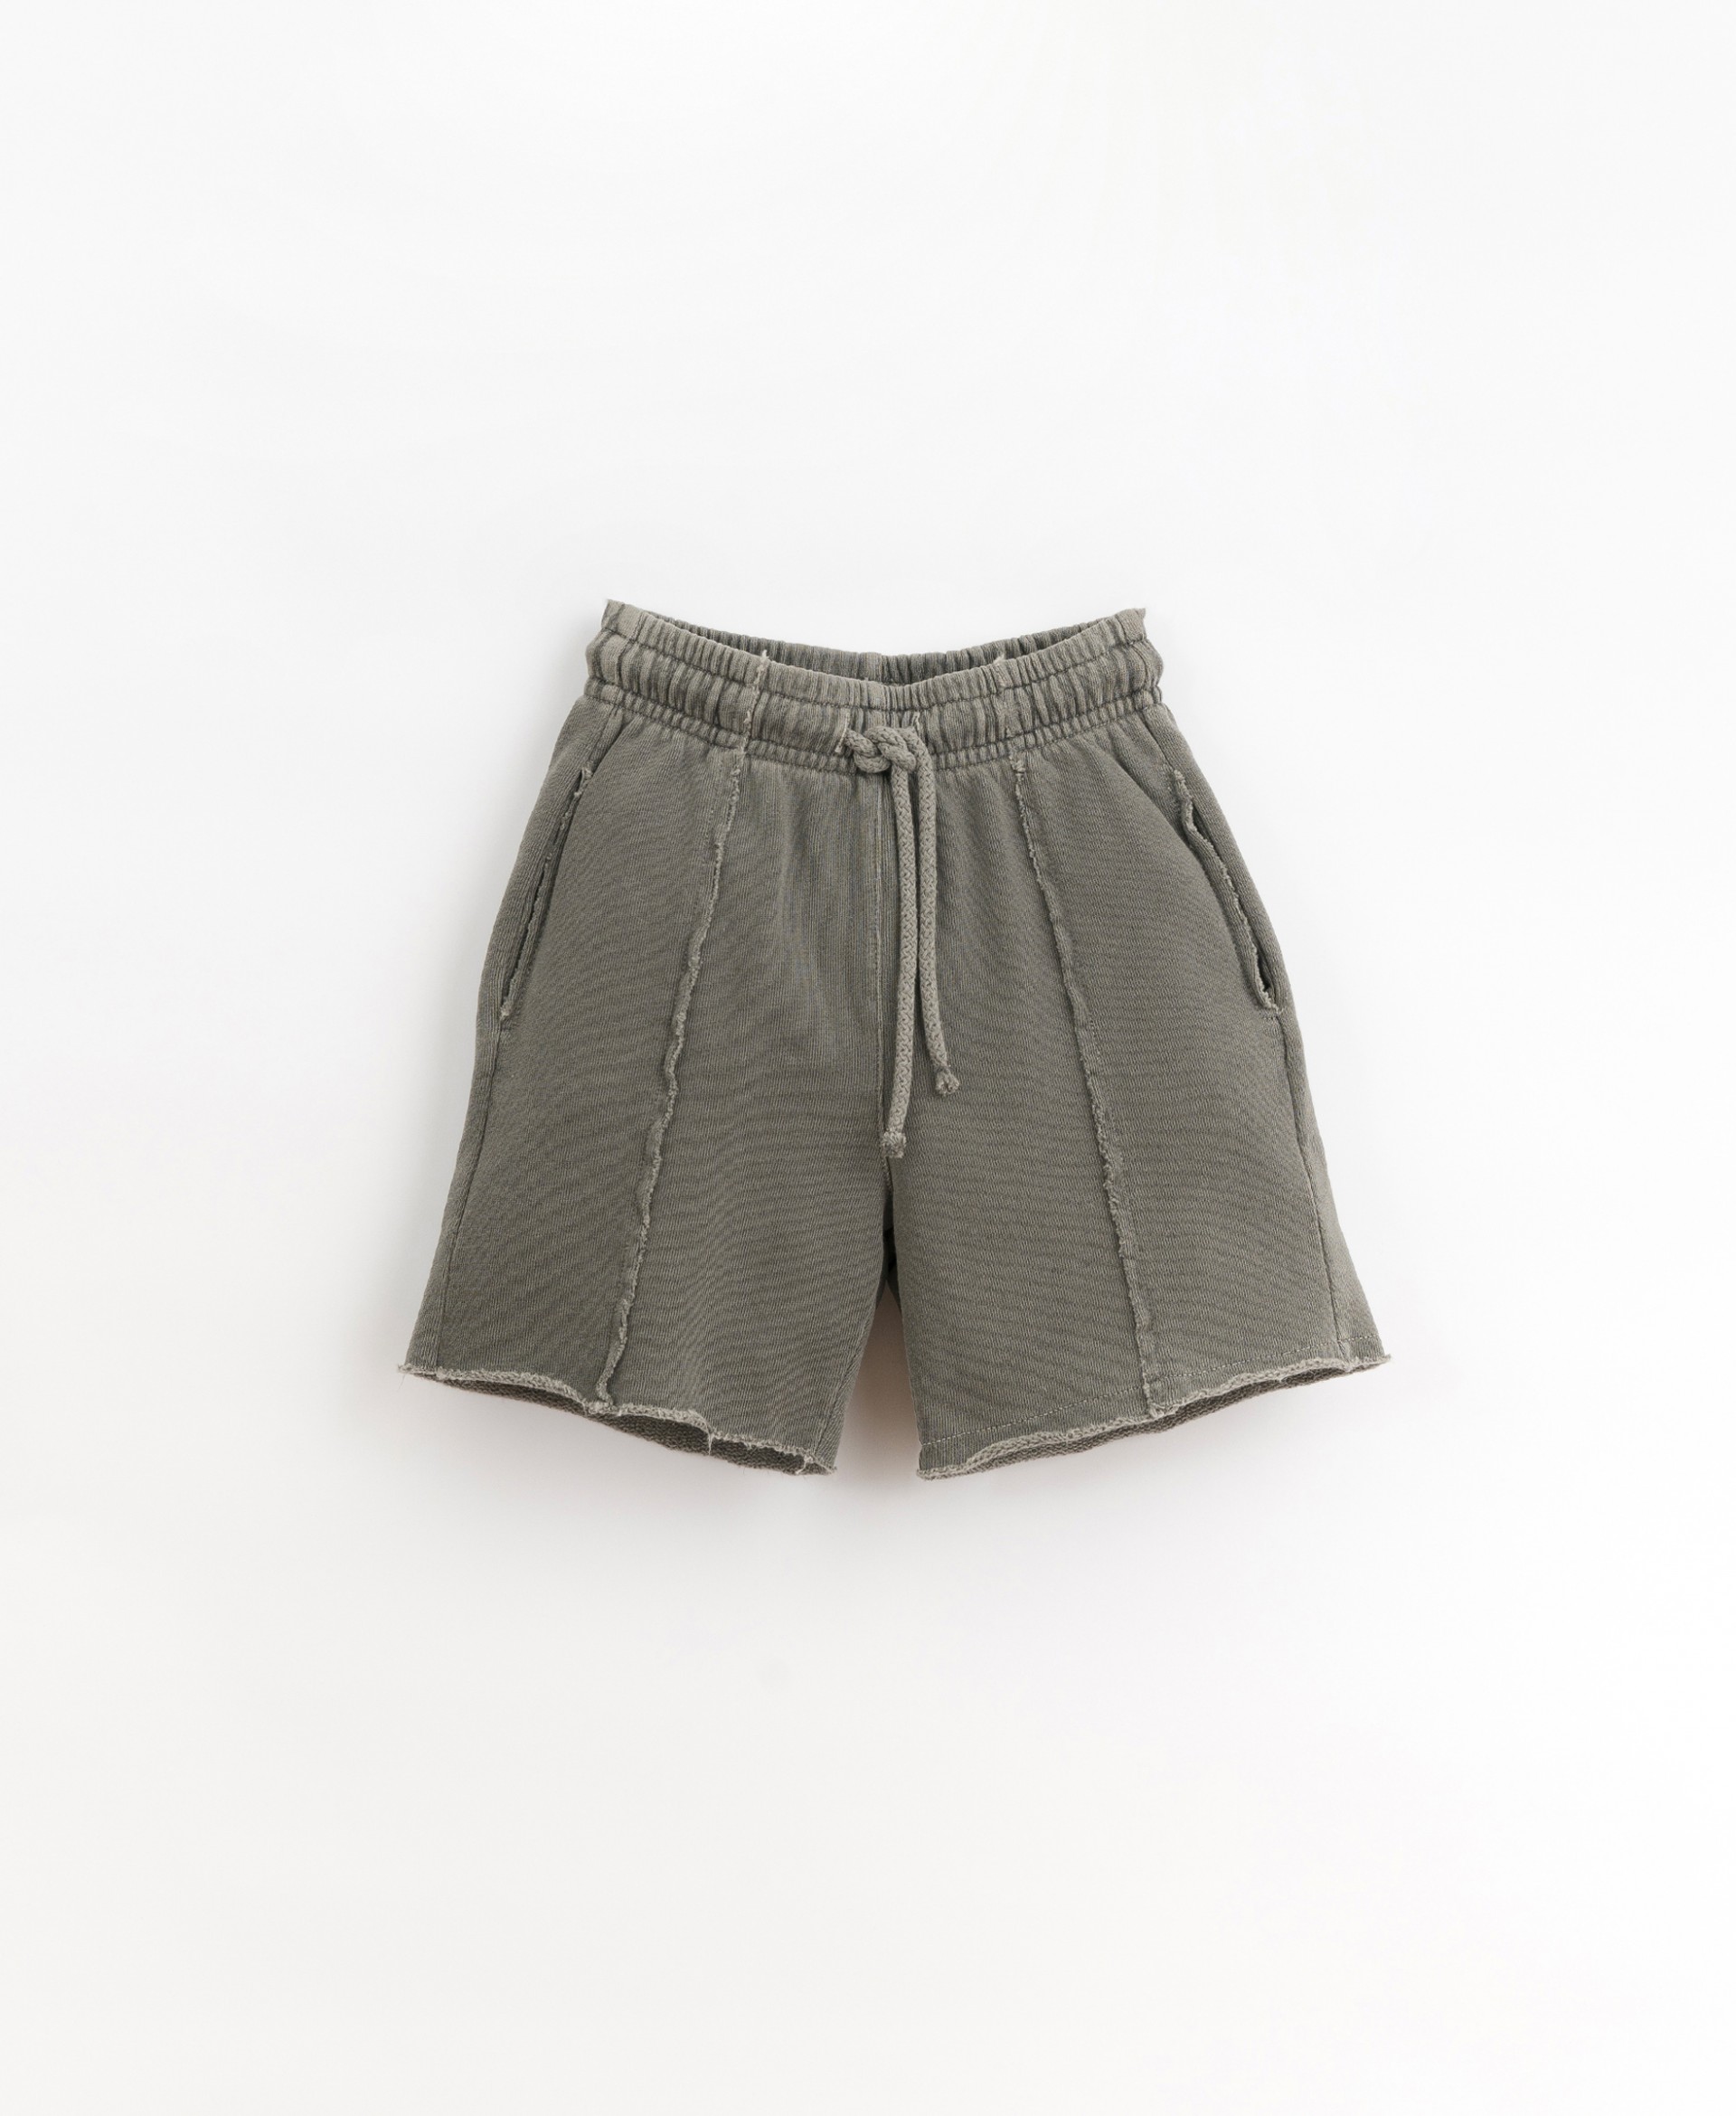 Naturally dyed shorts | Organic Care